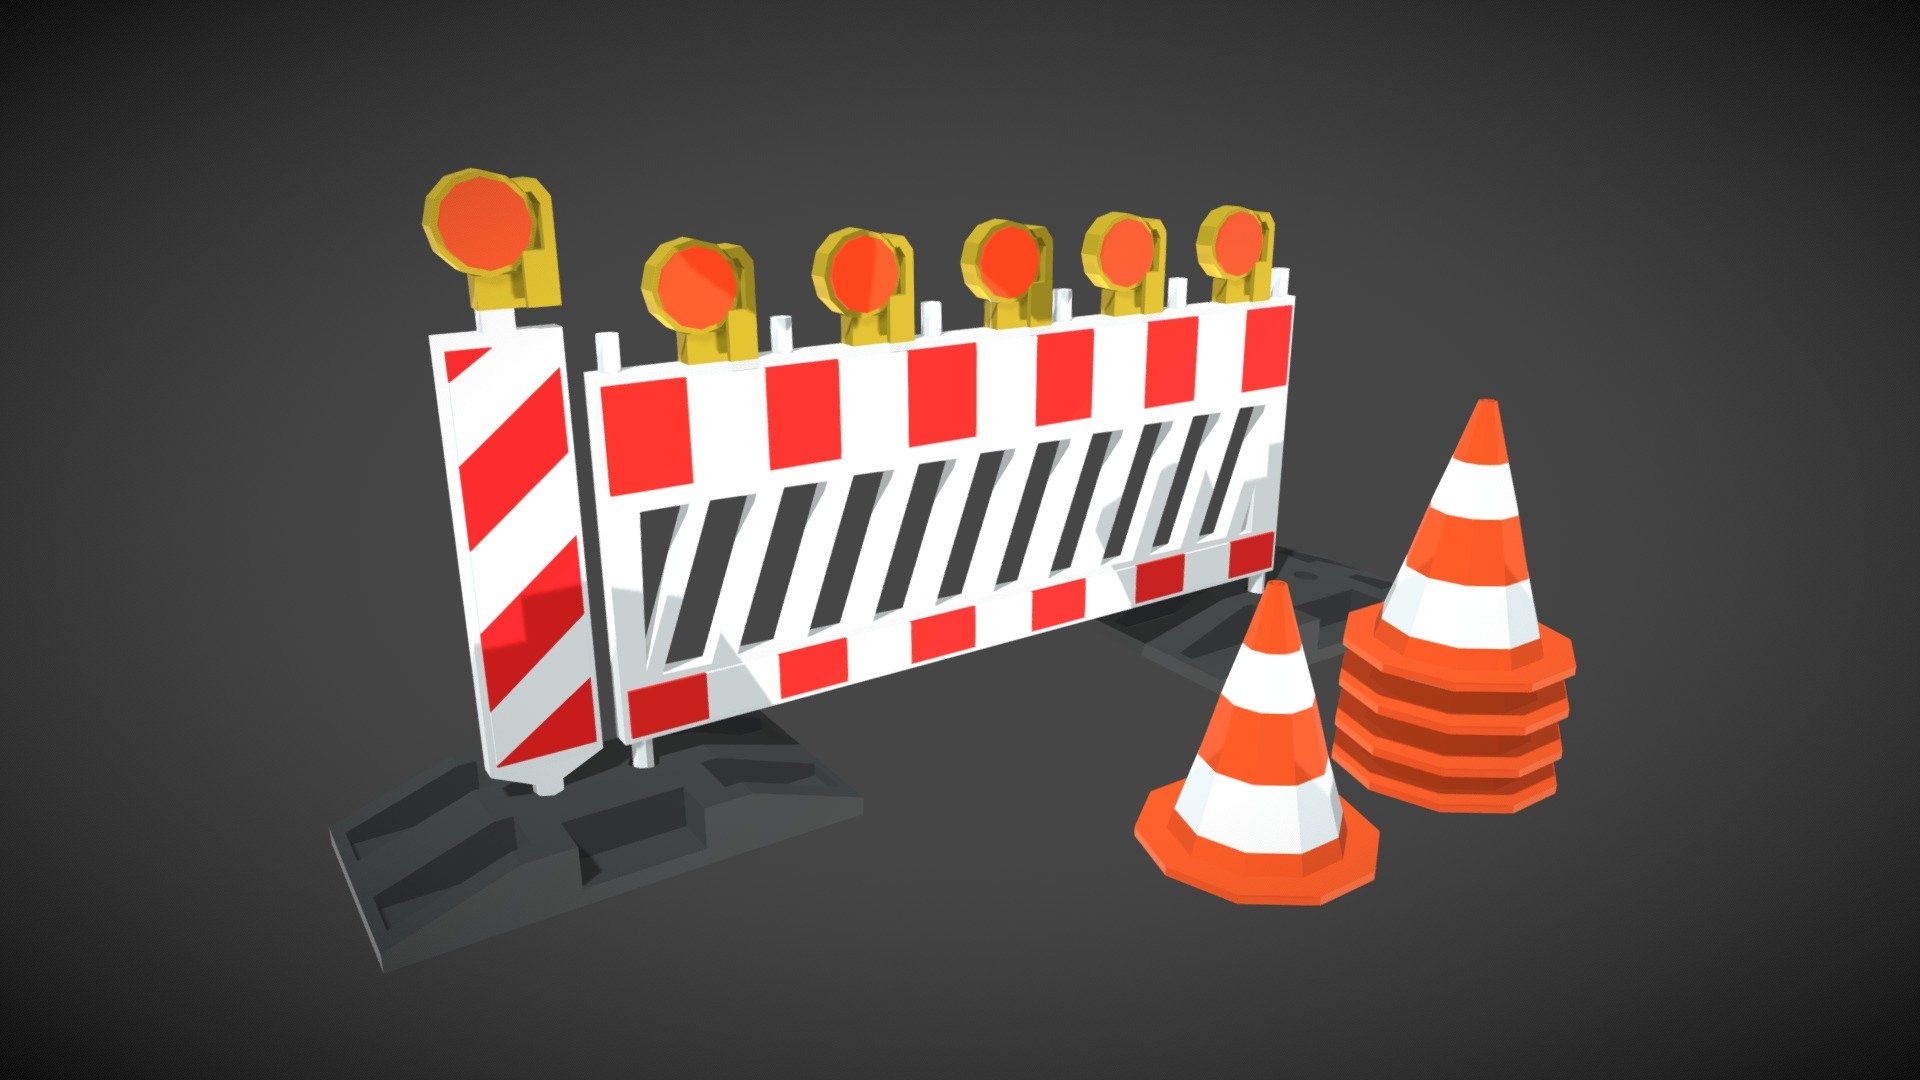 This is a simple lowpoly Street Construction Barrier. You could use it for your next game or video 3d model